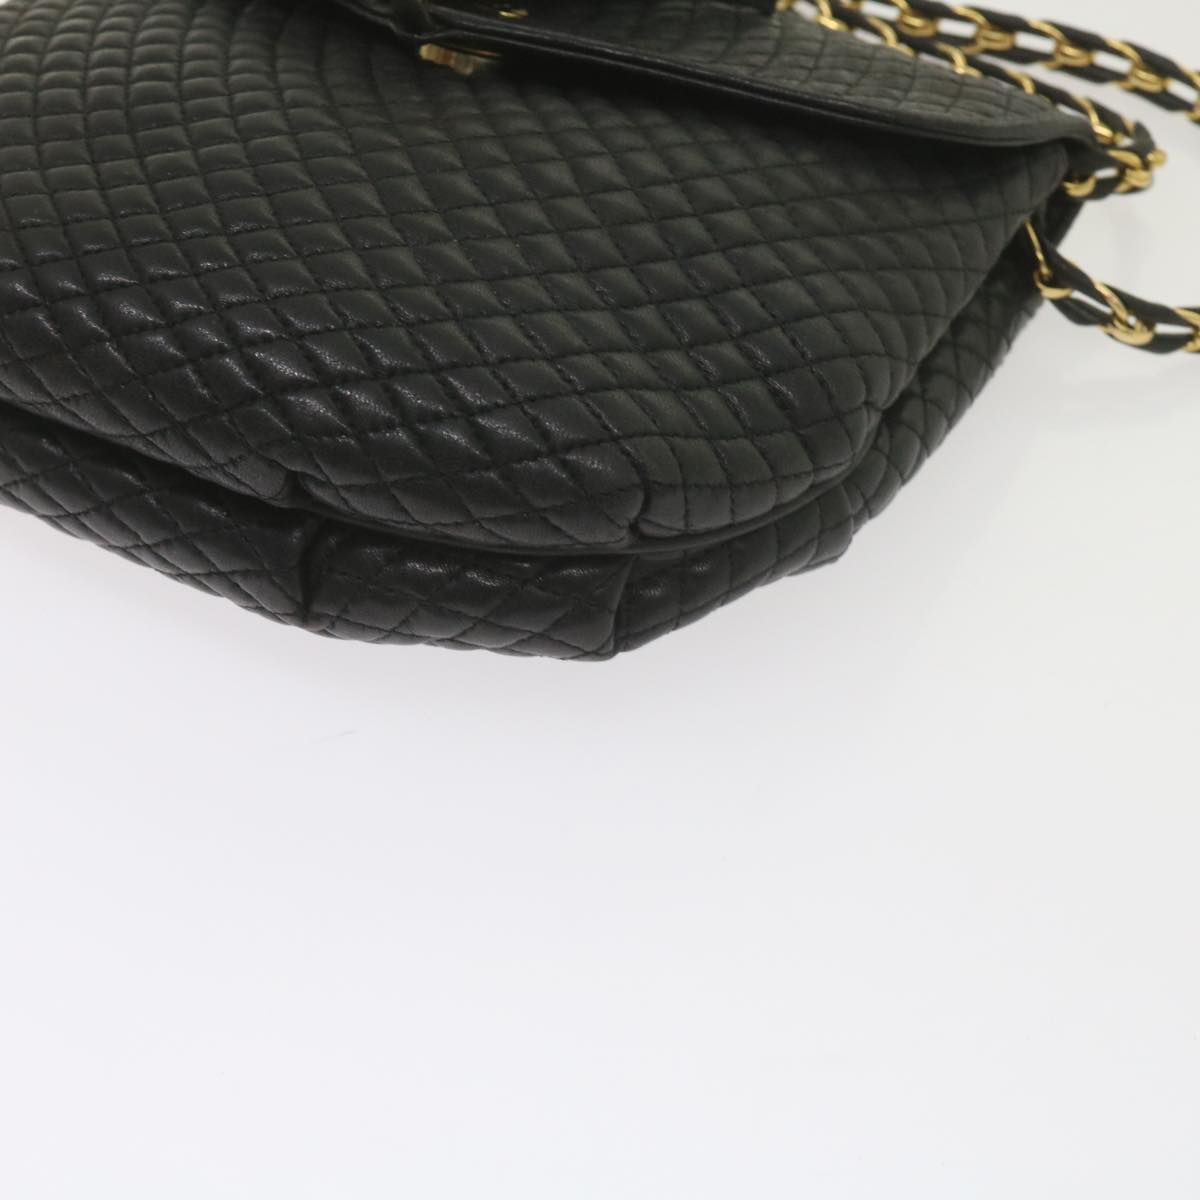 BALLY Quilted Chain Shoulder Bag Leather Black Auth yk9752